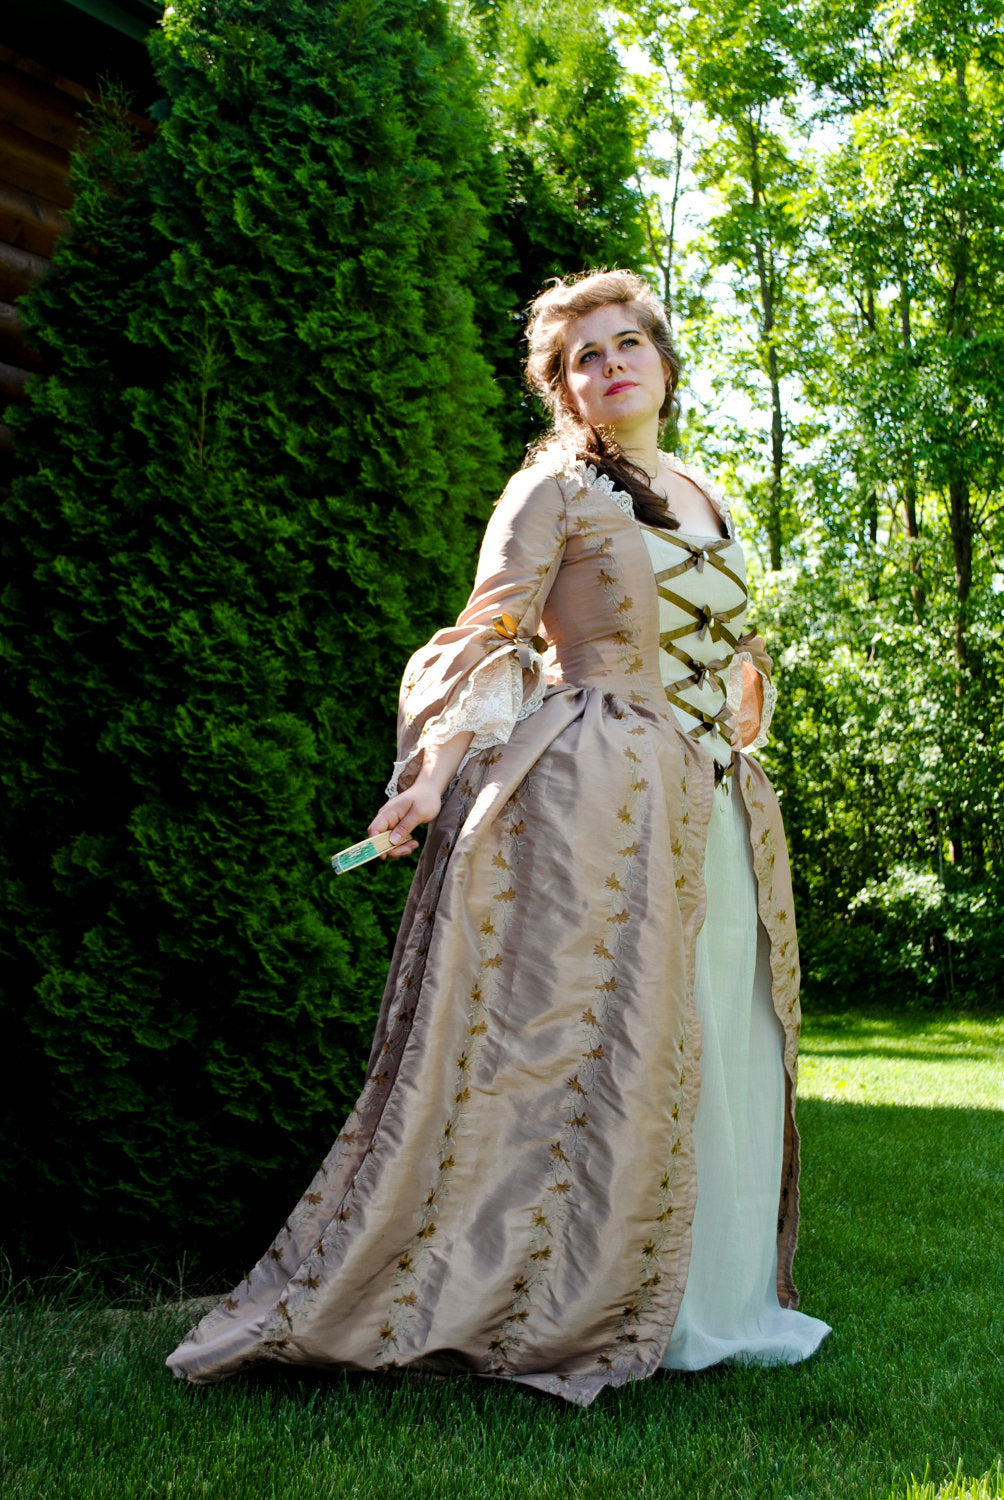 dresses of the 1700s